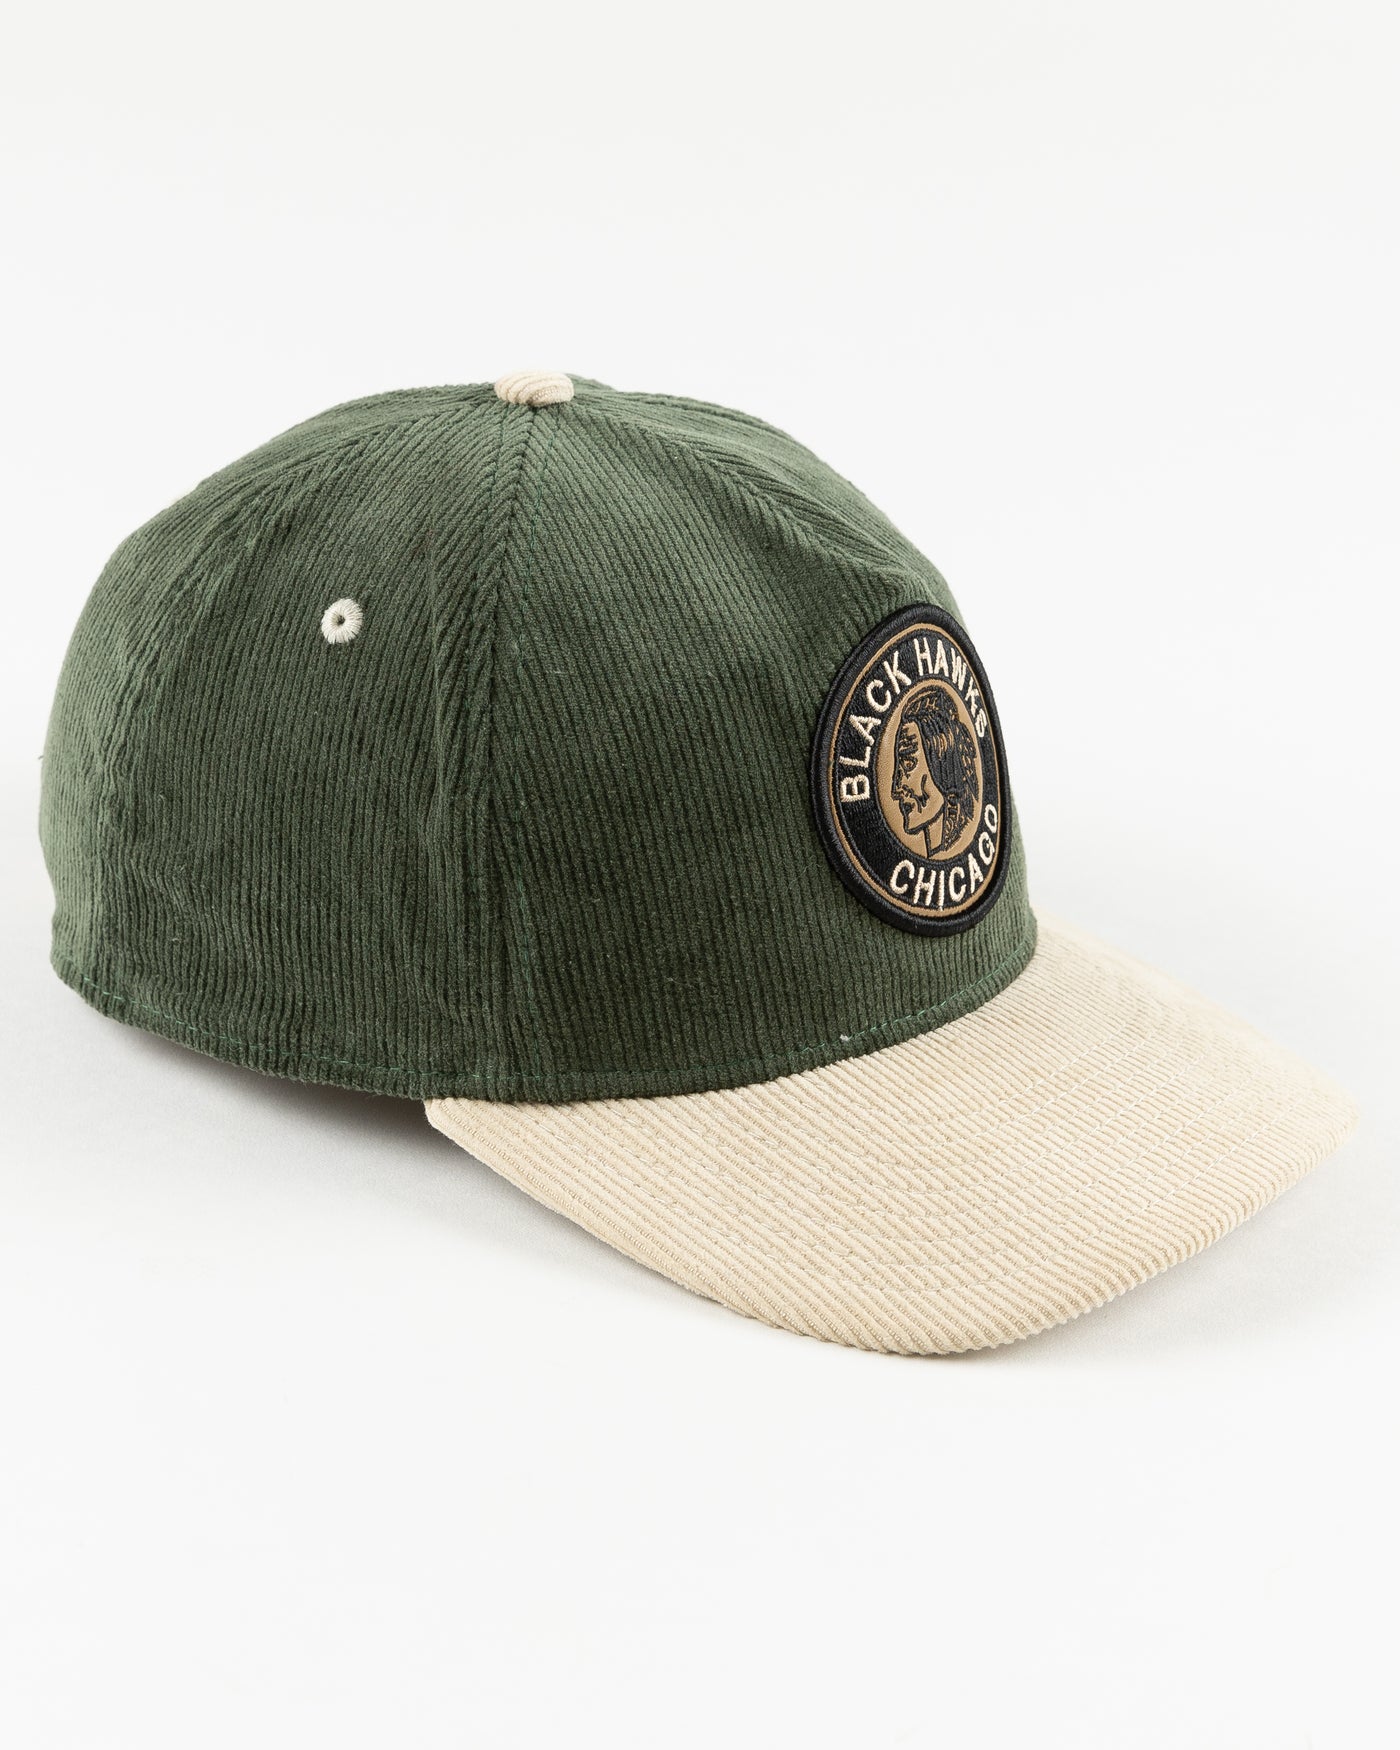 green and cream corduroy adjustable New Era cap with Chicago Blackhawks vintage logo on front - right angle lay flat